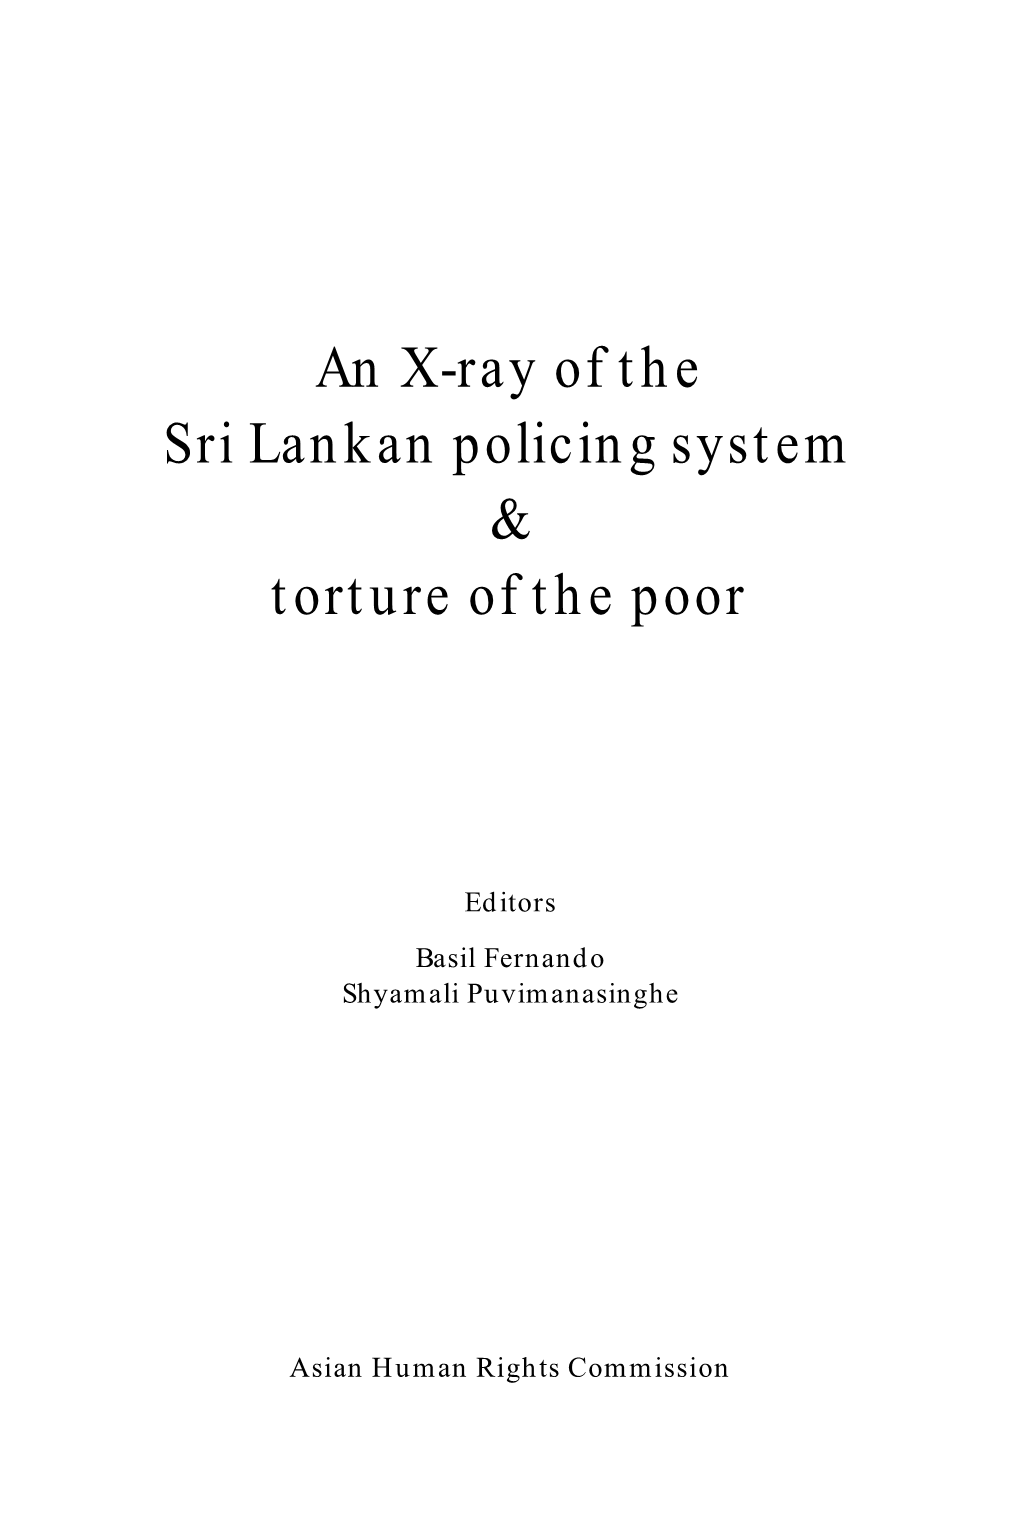 An X-Ray of the Sri Lankan Policing System & Torture of the Poor